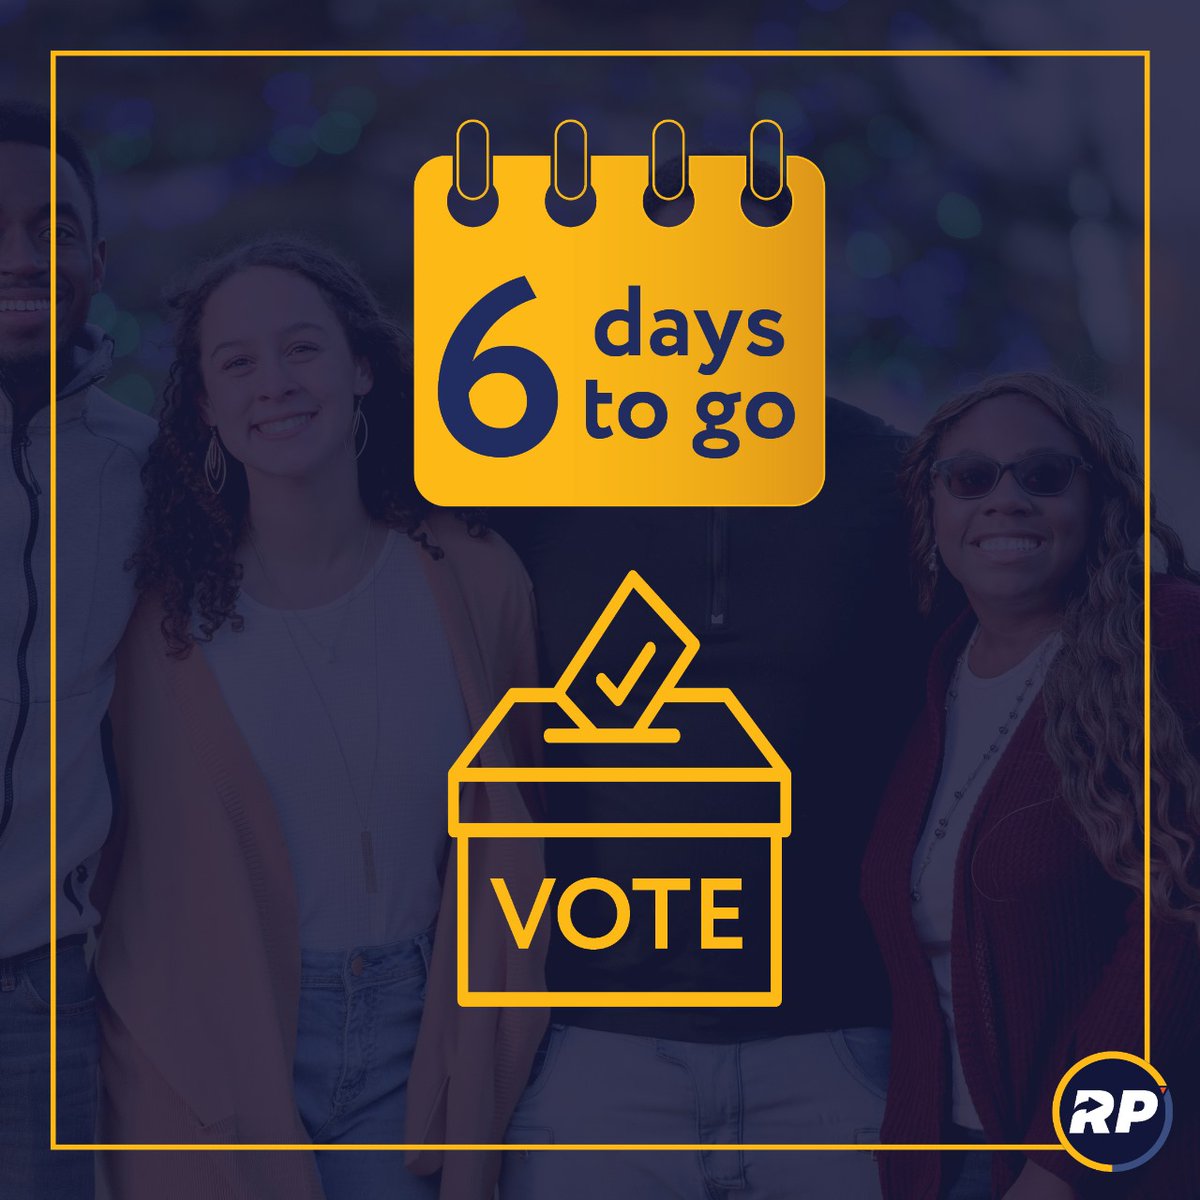 Six days until the election. The Western Cape needs a referendum to prove how serious we are about Cape Independence and being in charge of our own destiny. A vote for the RP is a vote for a first world future. #referendumparty #capeindependence